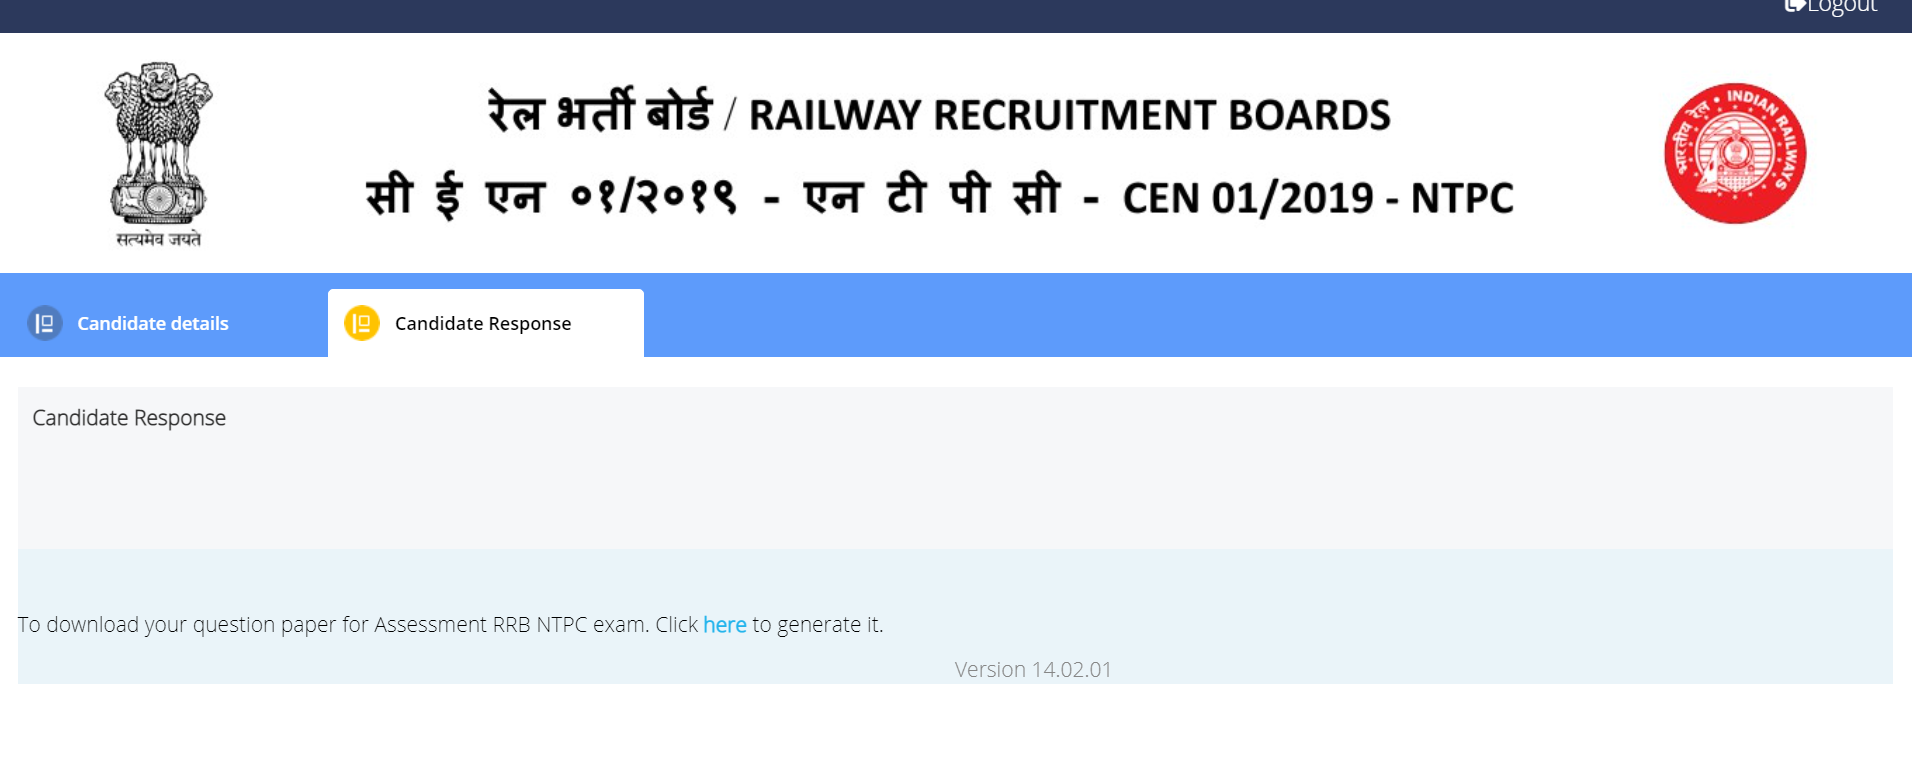 RRB NTPC CBT 1 Answer Key Candidate Response